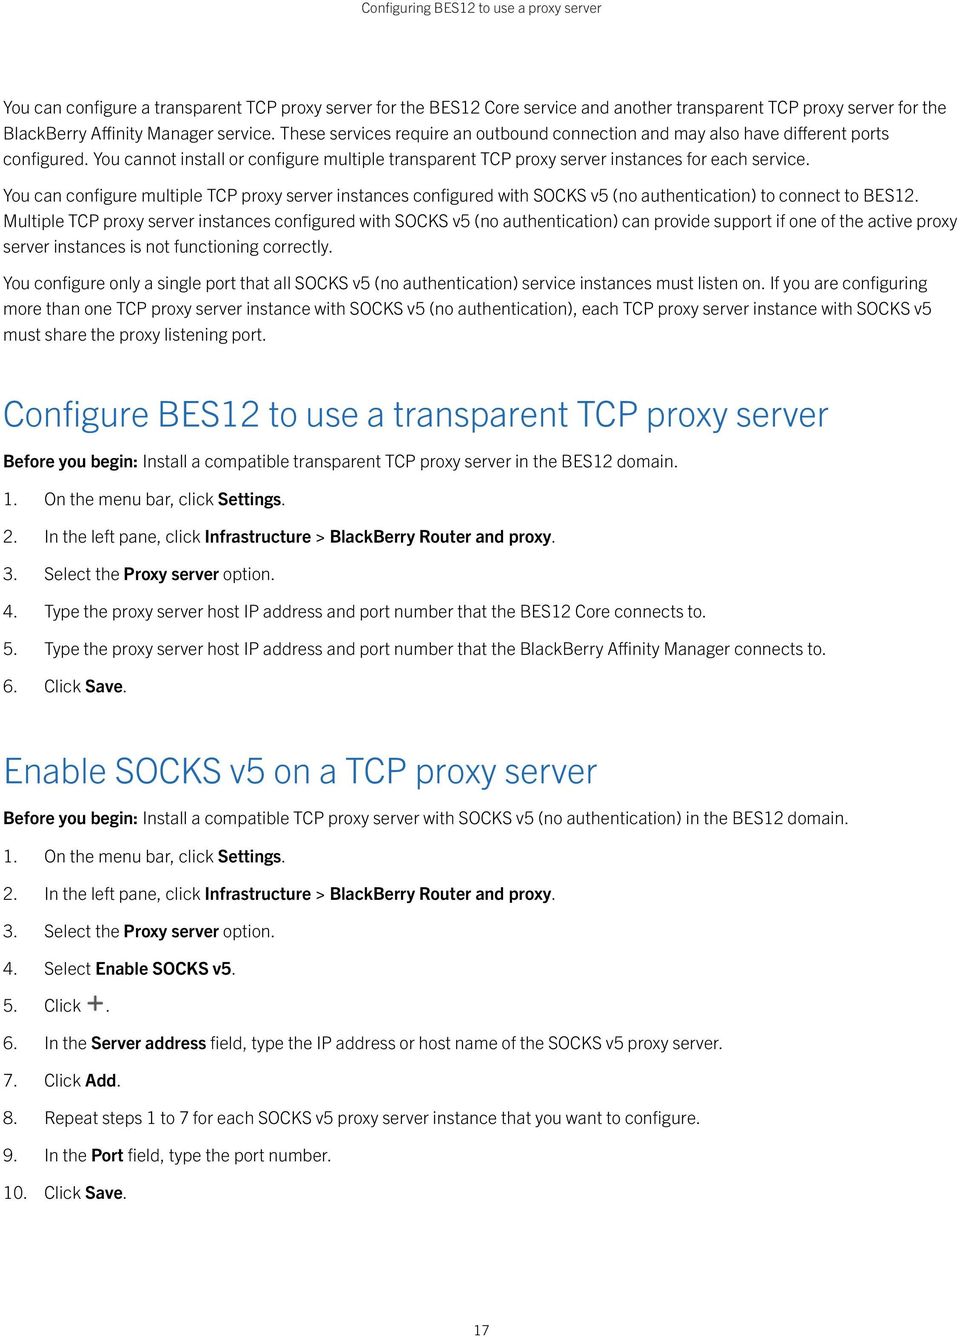 You can configure multiple TCP proxy server instances configured with SOCKS v5 (no authentication) to connect to BES12.